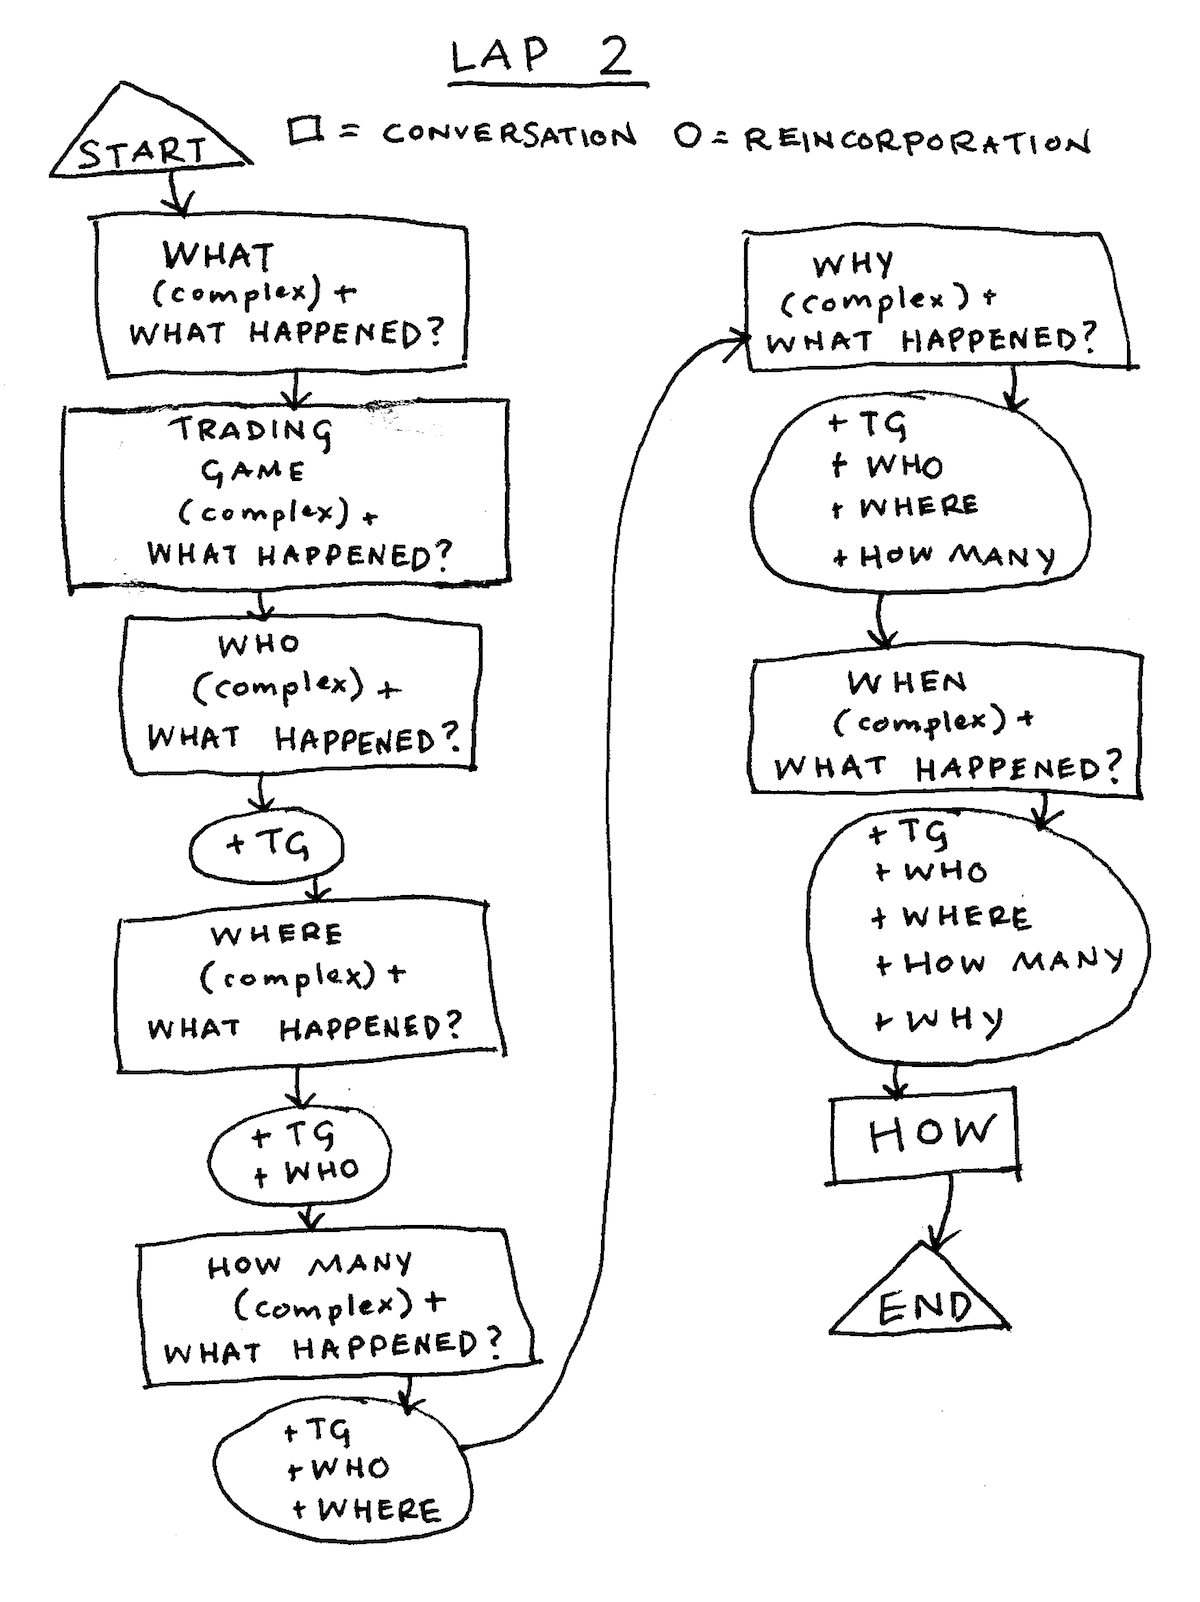 Flowchart for Lap 2 - More complex conversations, plus "What Happened?", WHEN, and HOW